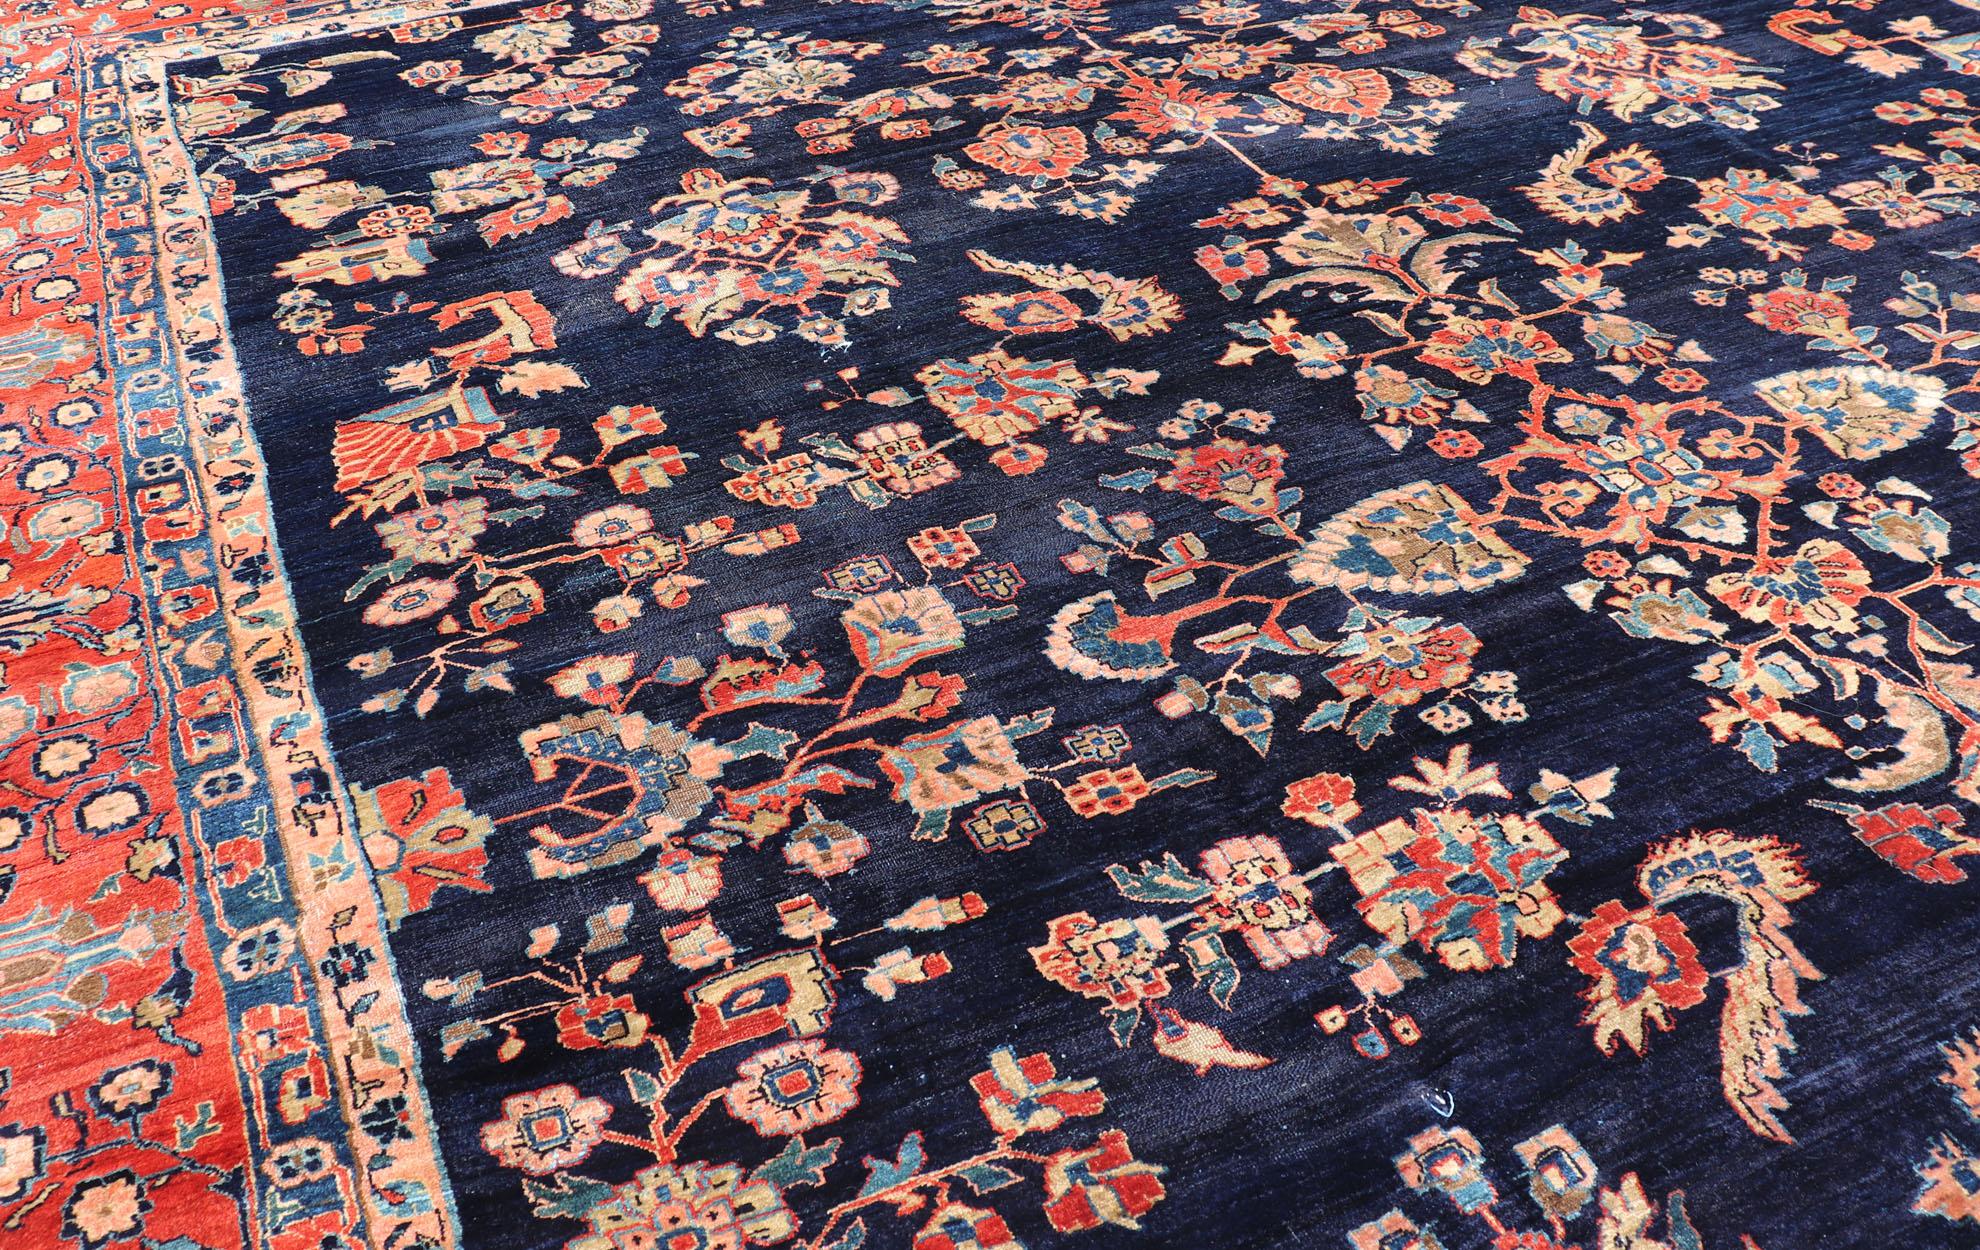 Antique Large Sarouk Faraghan Rug with Floral Pattern in Navy and Orange-Red For Sale 3